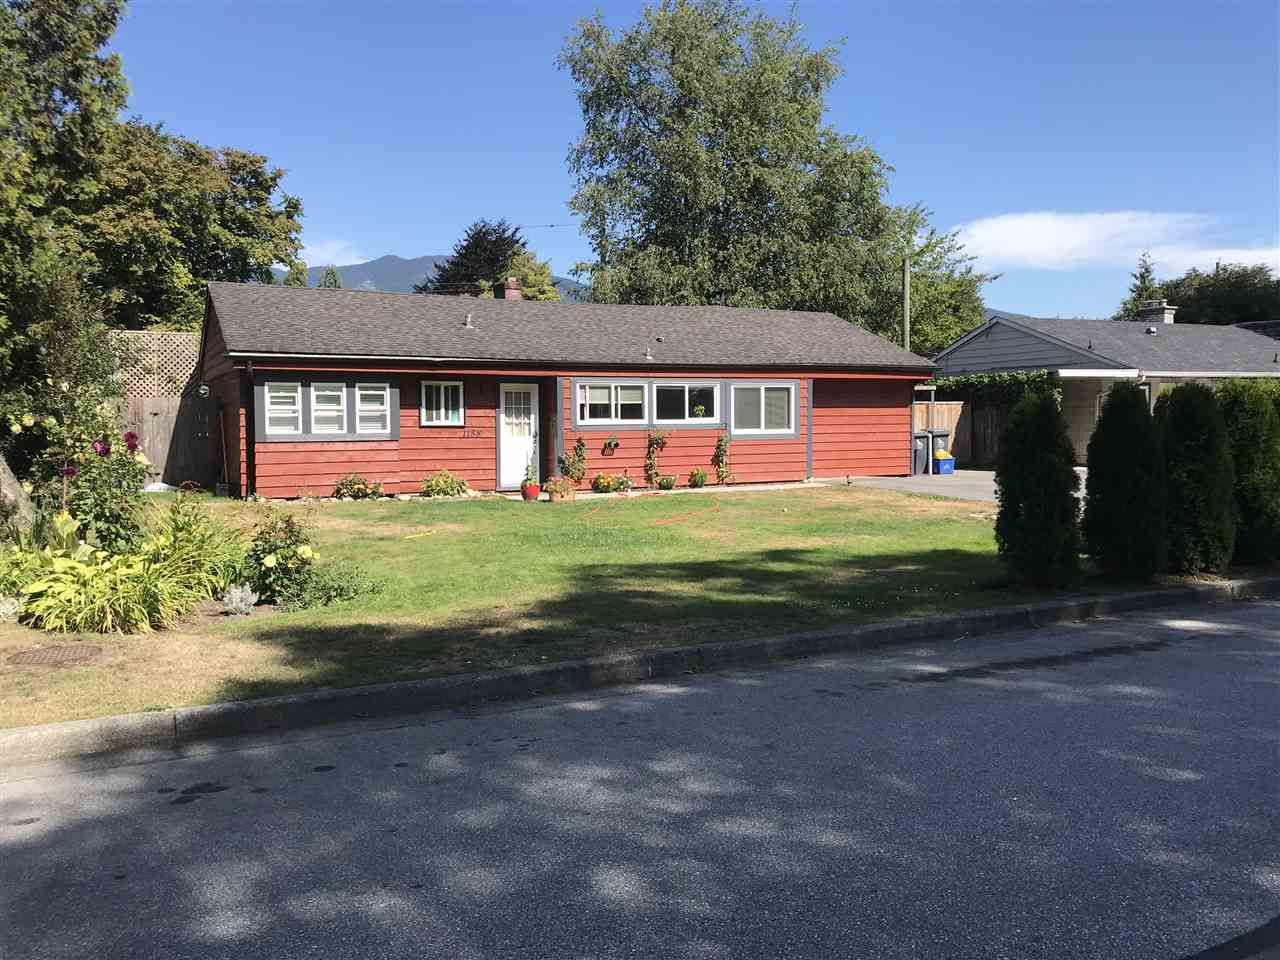 BLS REAL ESTATE TEAM | Greater Vancouver Realtor Lori Haggarty SOLD HOME LISTING at 1158 PINEWOOD CRESCENT Norgate 